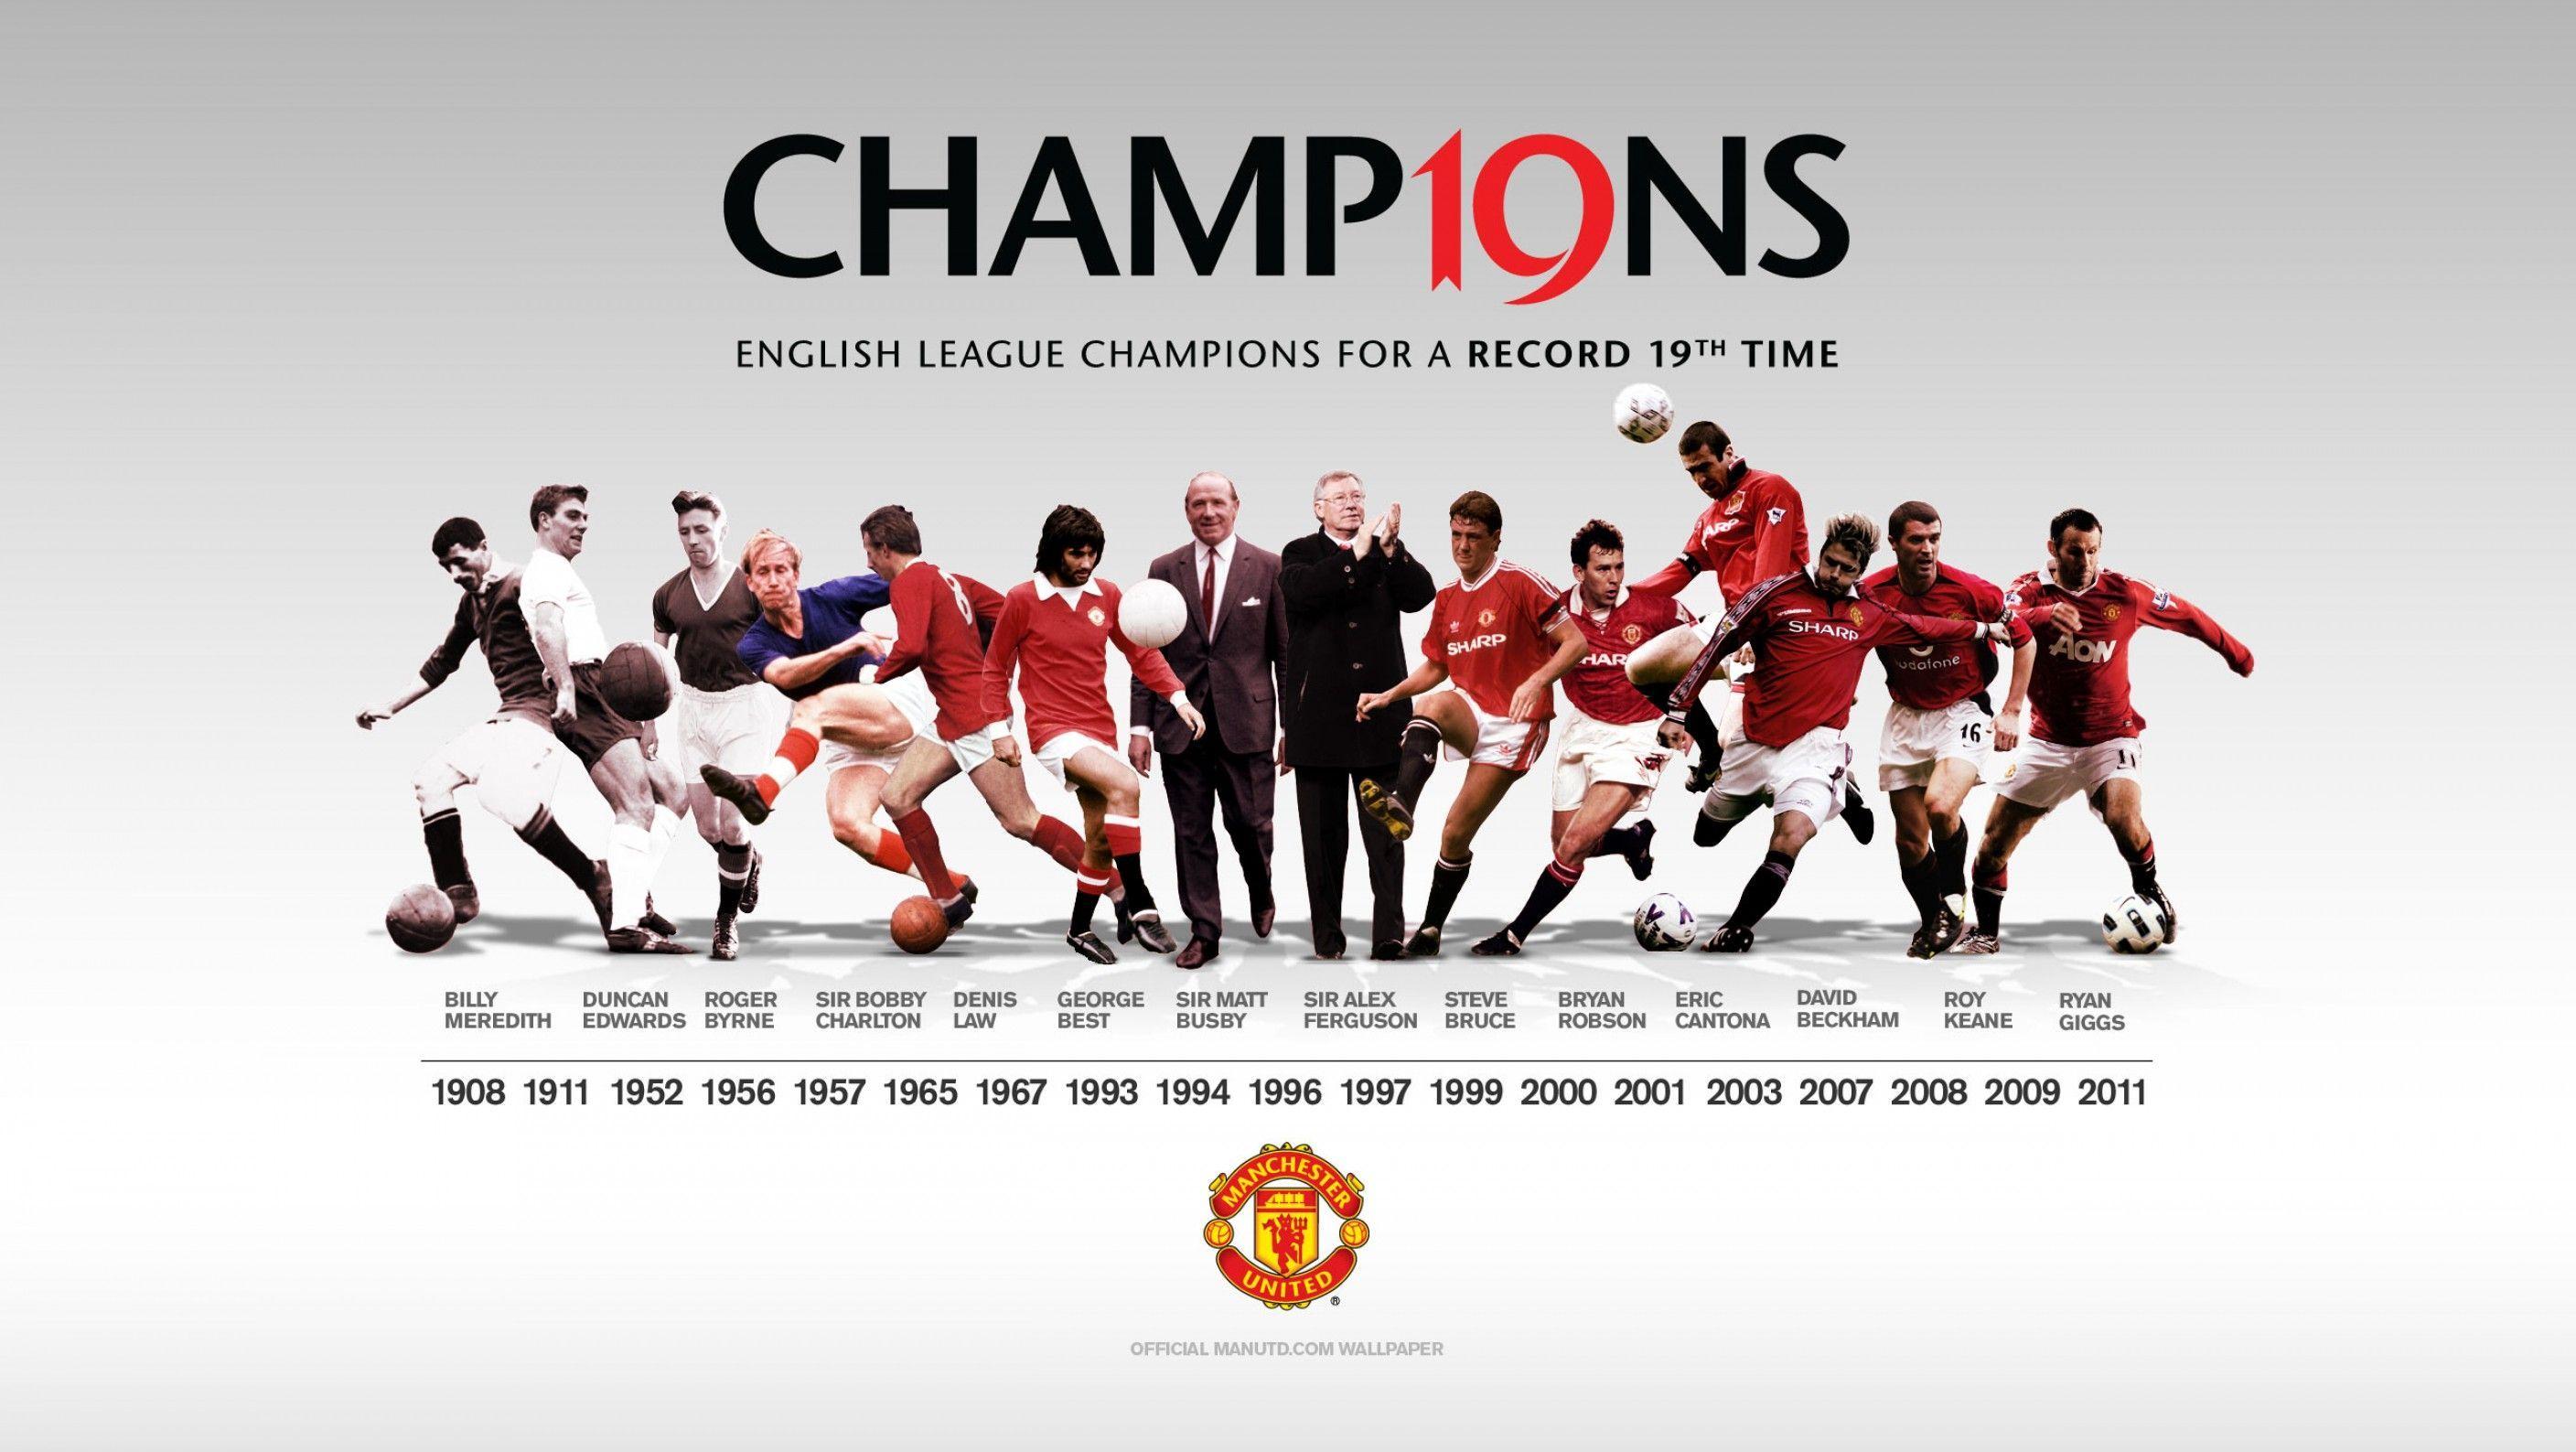 Manchester United Wallpapers 3D 2016 Wallpaper Cave